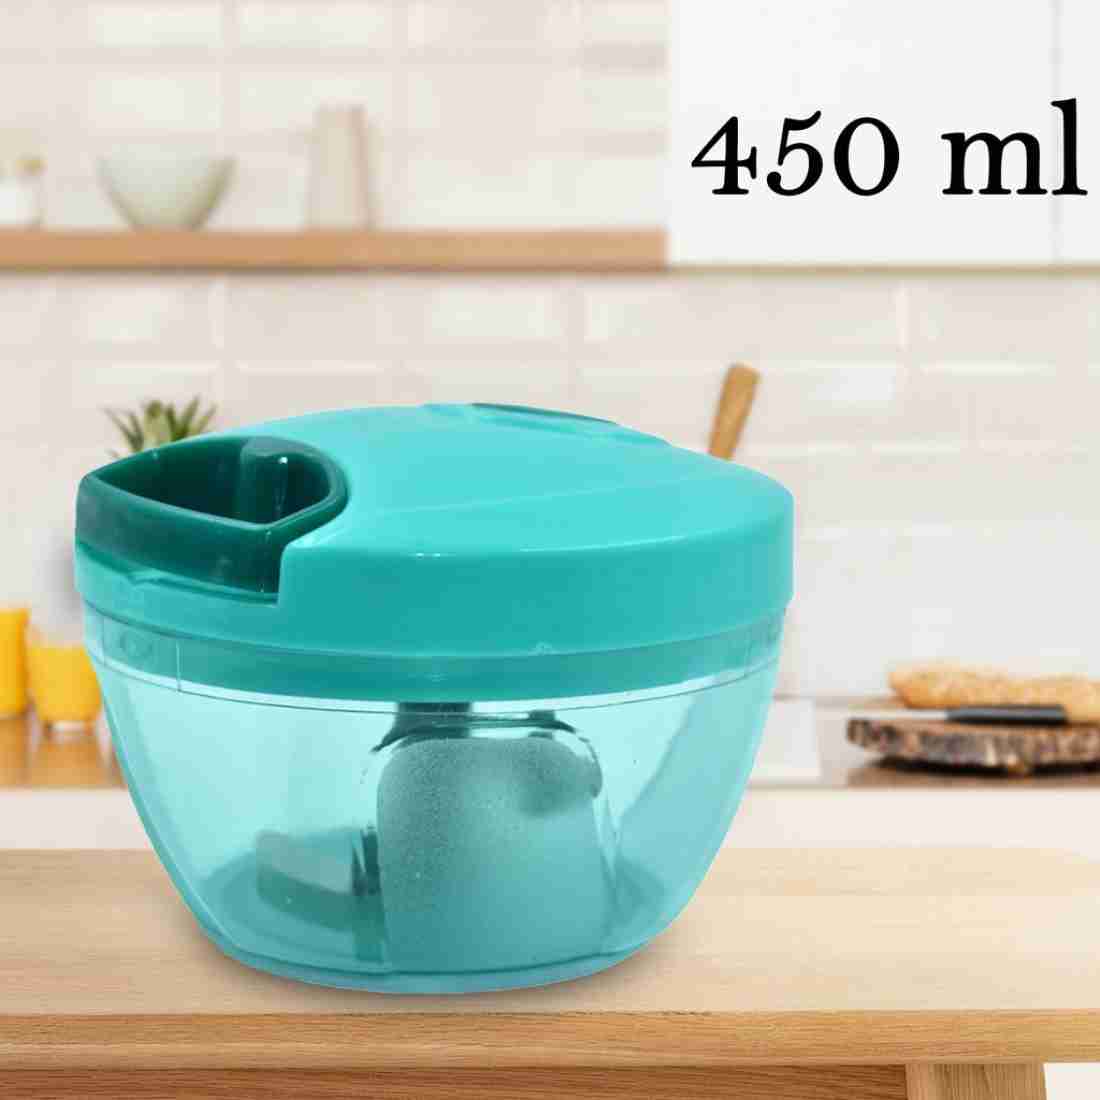 Buy 2904 Plastic Compact Vegetable Chopper (450ml) online from